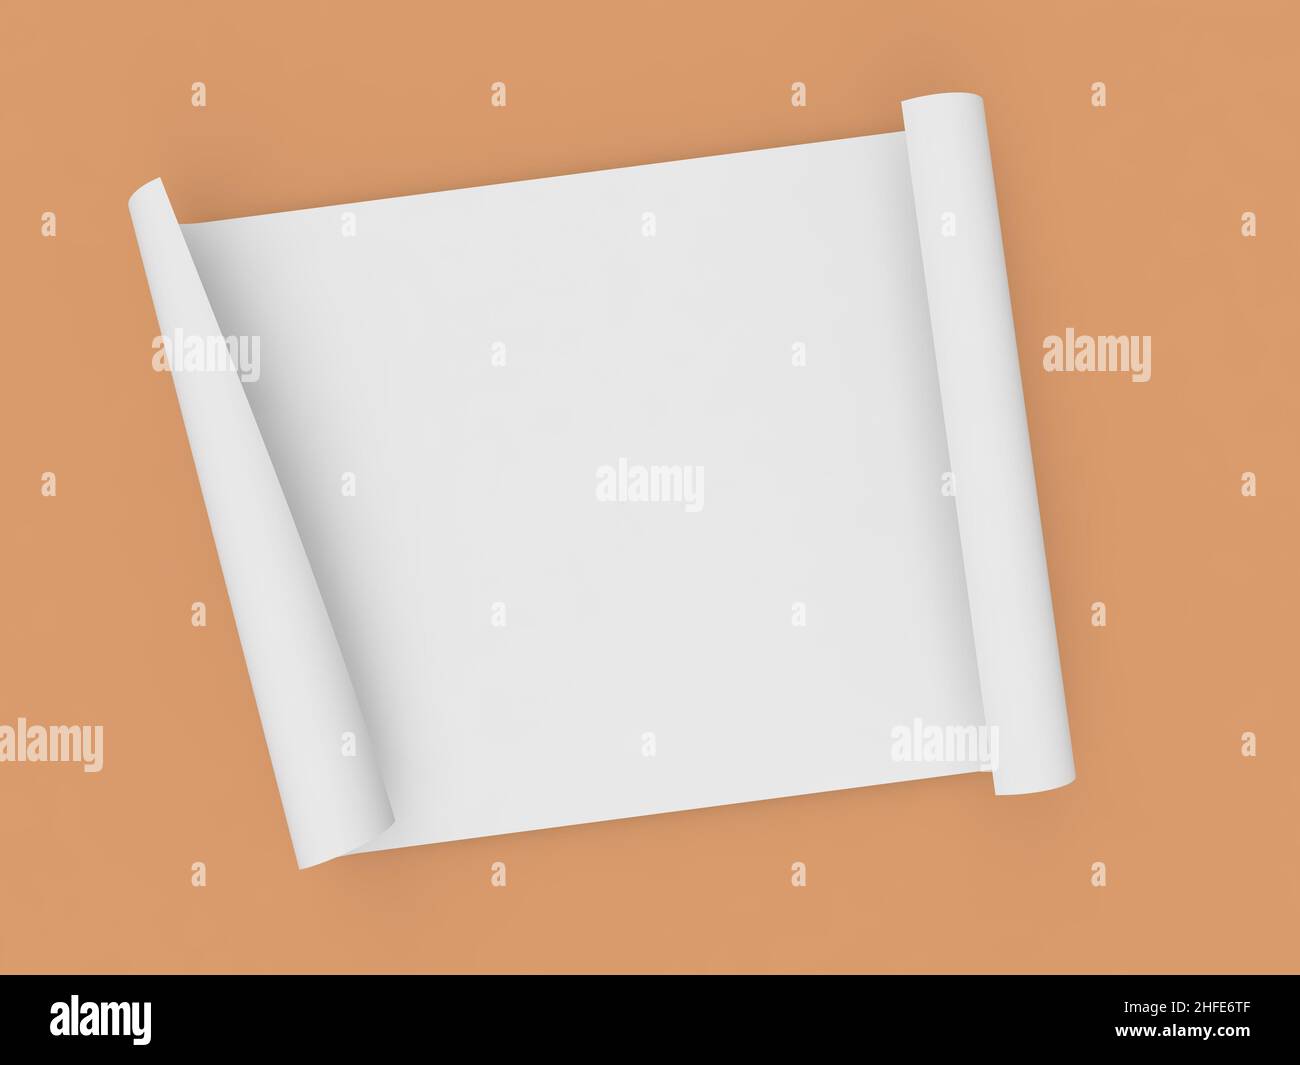 Rolled roll of A4 size office paper on orange background. 3d render illustration. Stock Photo